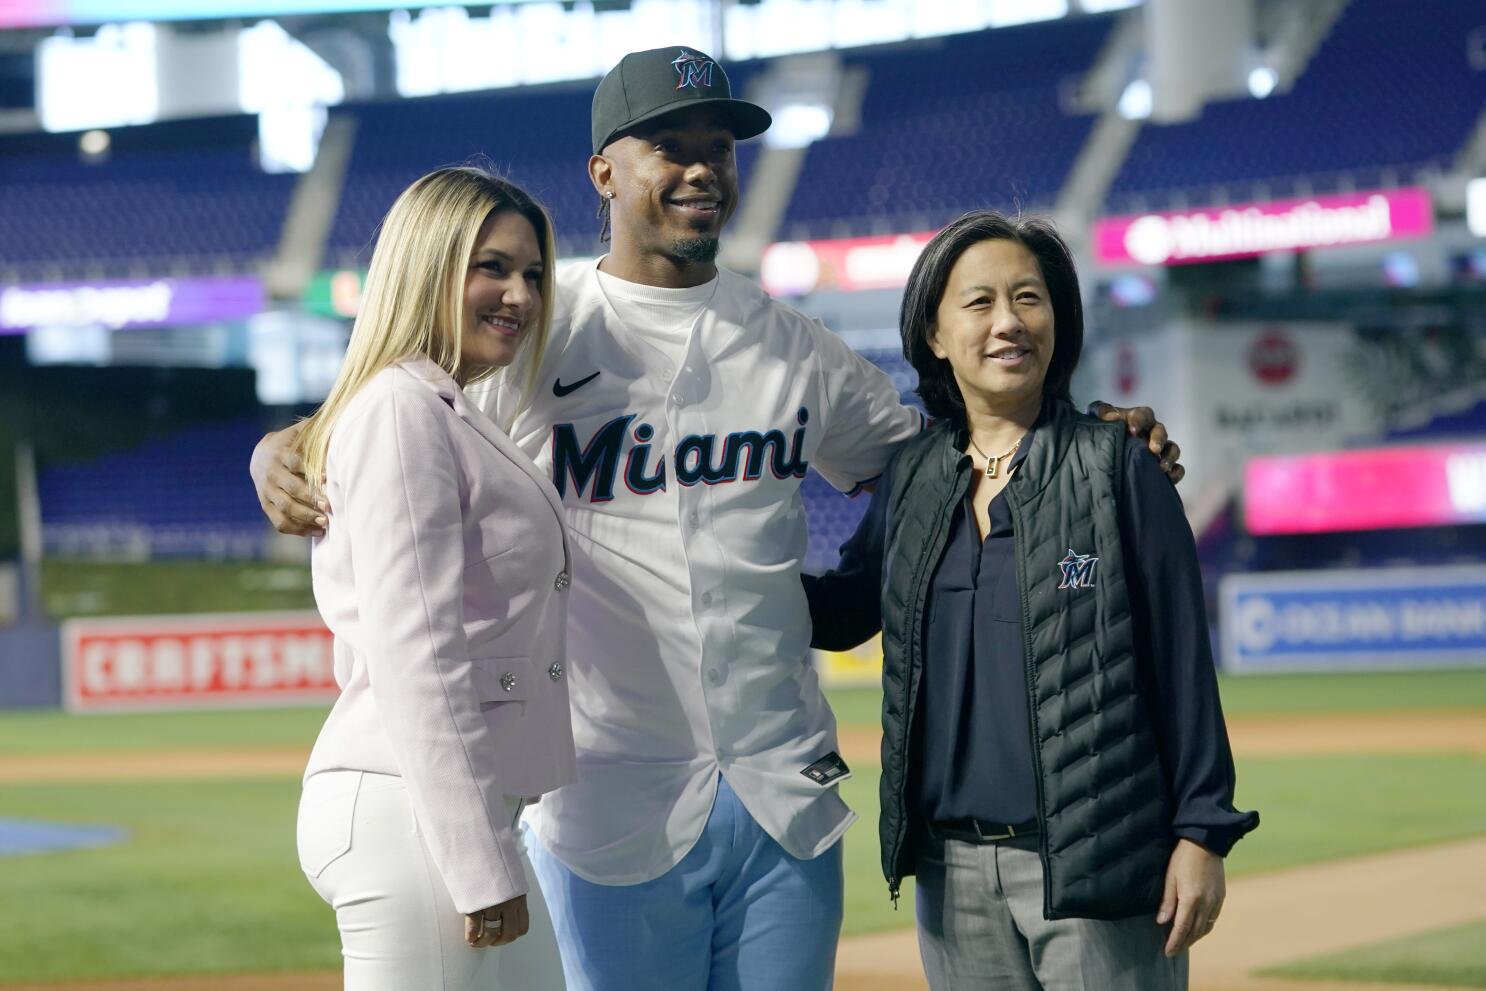 Segura introduced by Marlins, talks plan to play third base - The